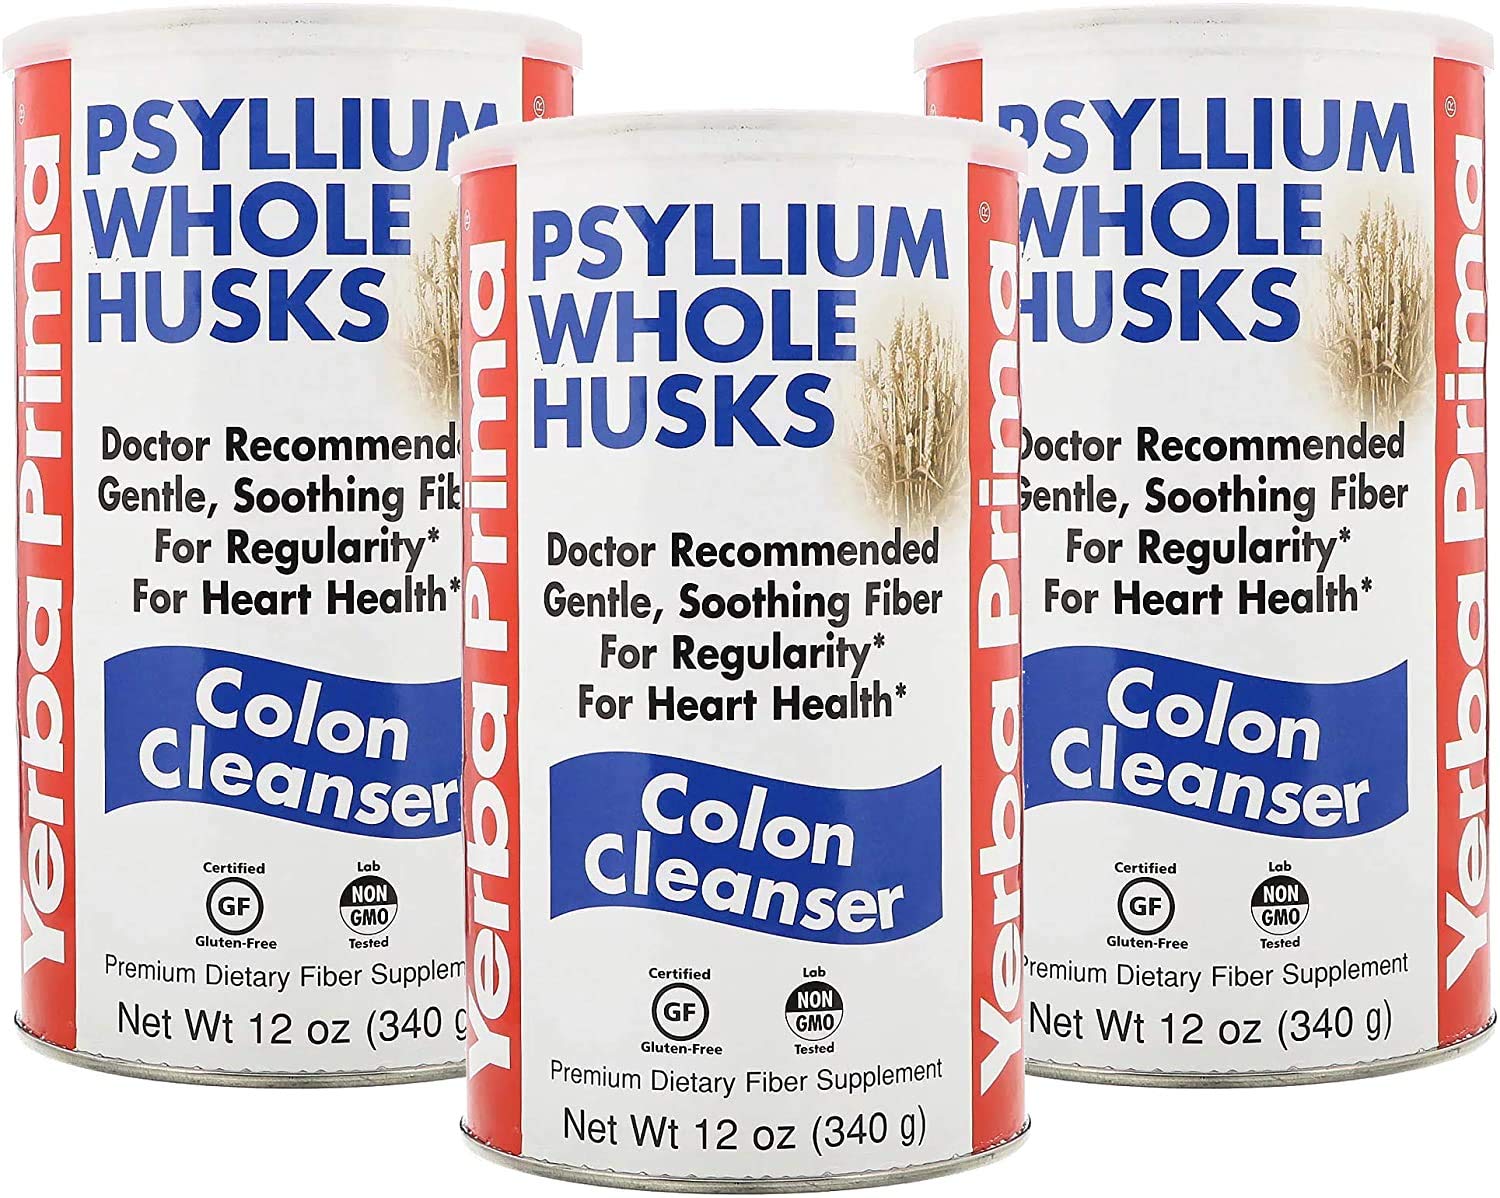 Yerba Prima Psyllium Husk, 12 Ounce (Pack of 3) - Fiber Supplement for Regularity, Colon Cleansing, Natural Support for Gut Health, Non GMO, Gluten Free, Vegan, No Sweeteners